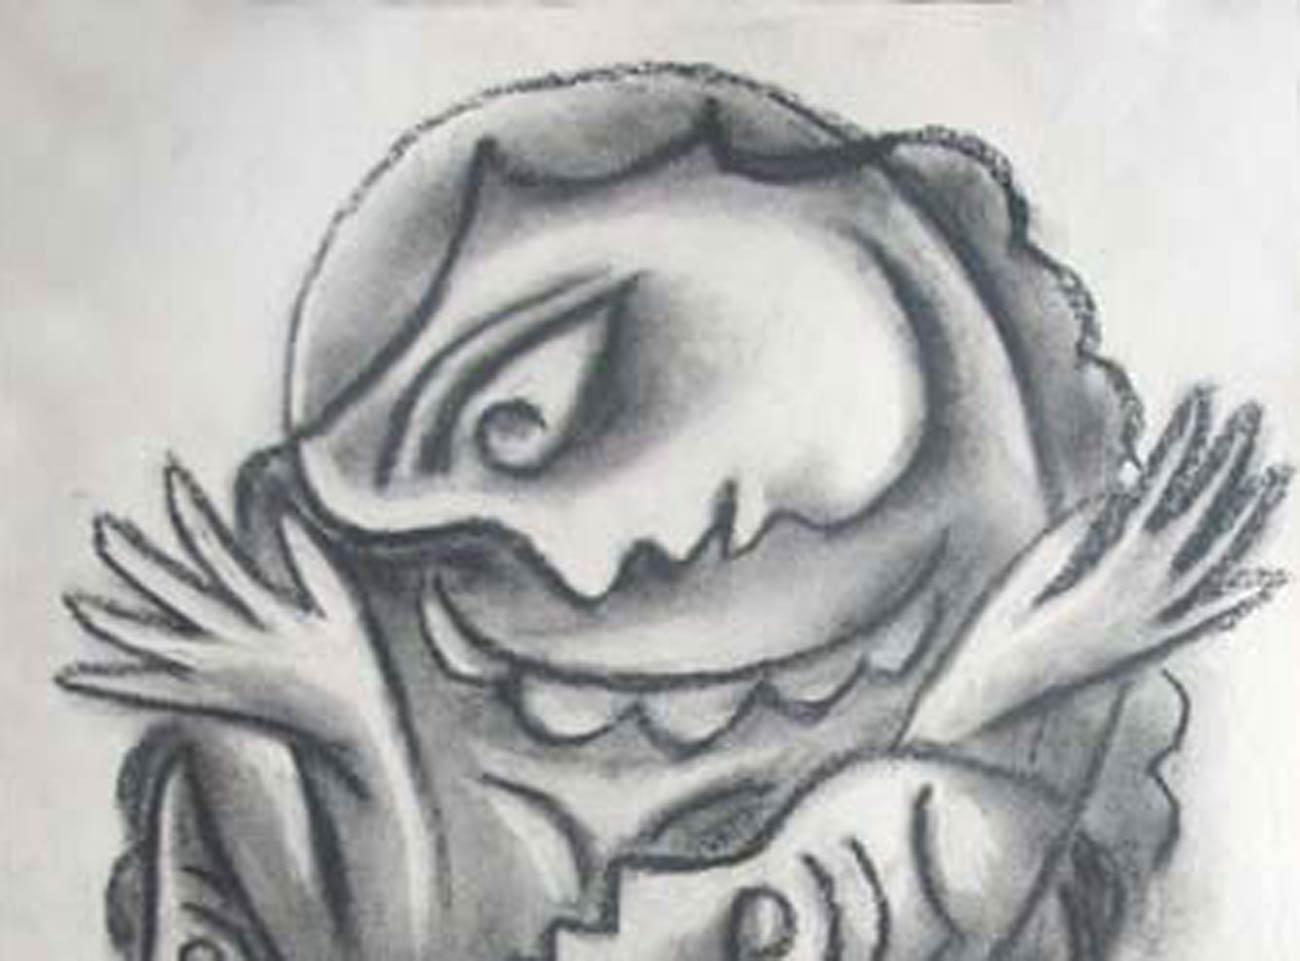 Sanat Kar - Mother - 22 x 18  inches (unframed size)
Mixed Media and charcoal on paper
Inclusive of shipment in roll form.

Style: Majority of Sanat Kar's works are surrealistic and have a curious dream-like appearance.Figures are distorted and